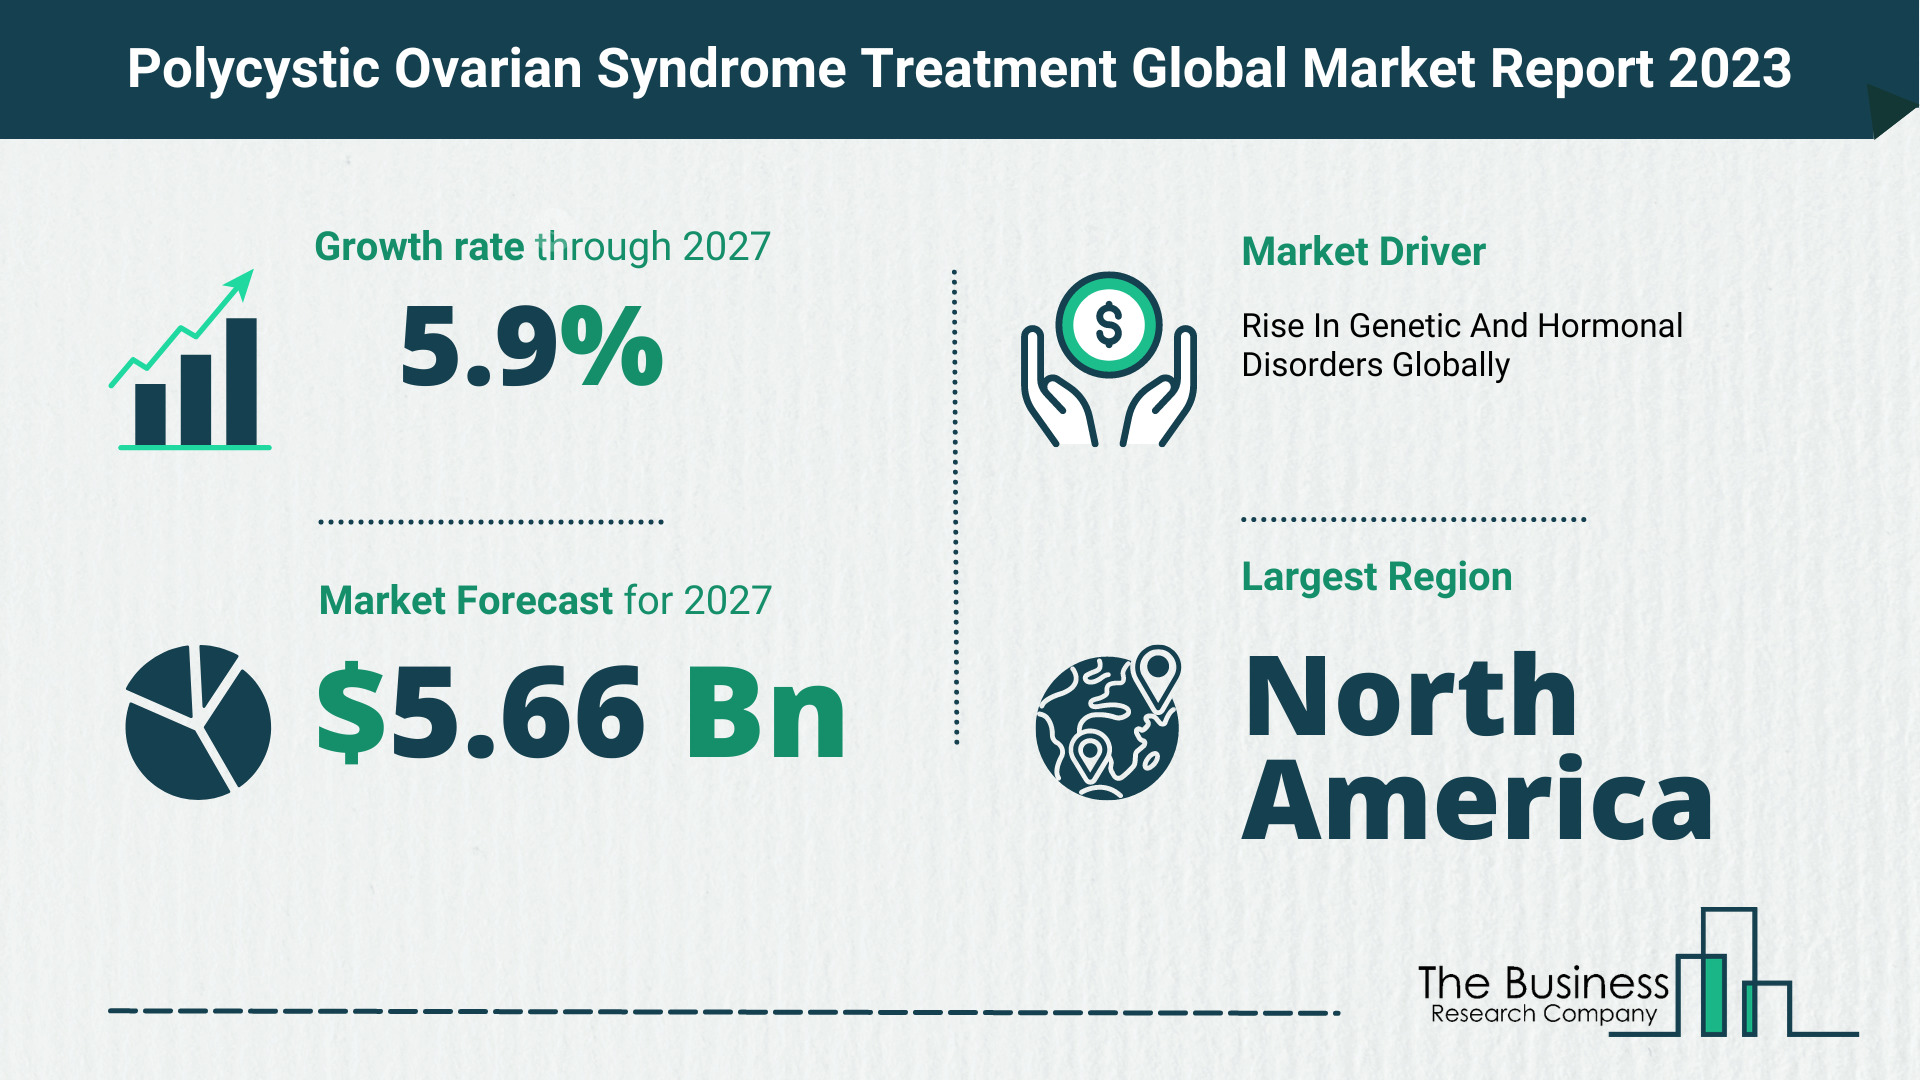 Polycystic Ovarian Syndrome Treatment Market Size, Share, And Growth Rate Analysis 2023